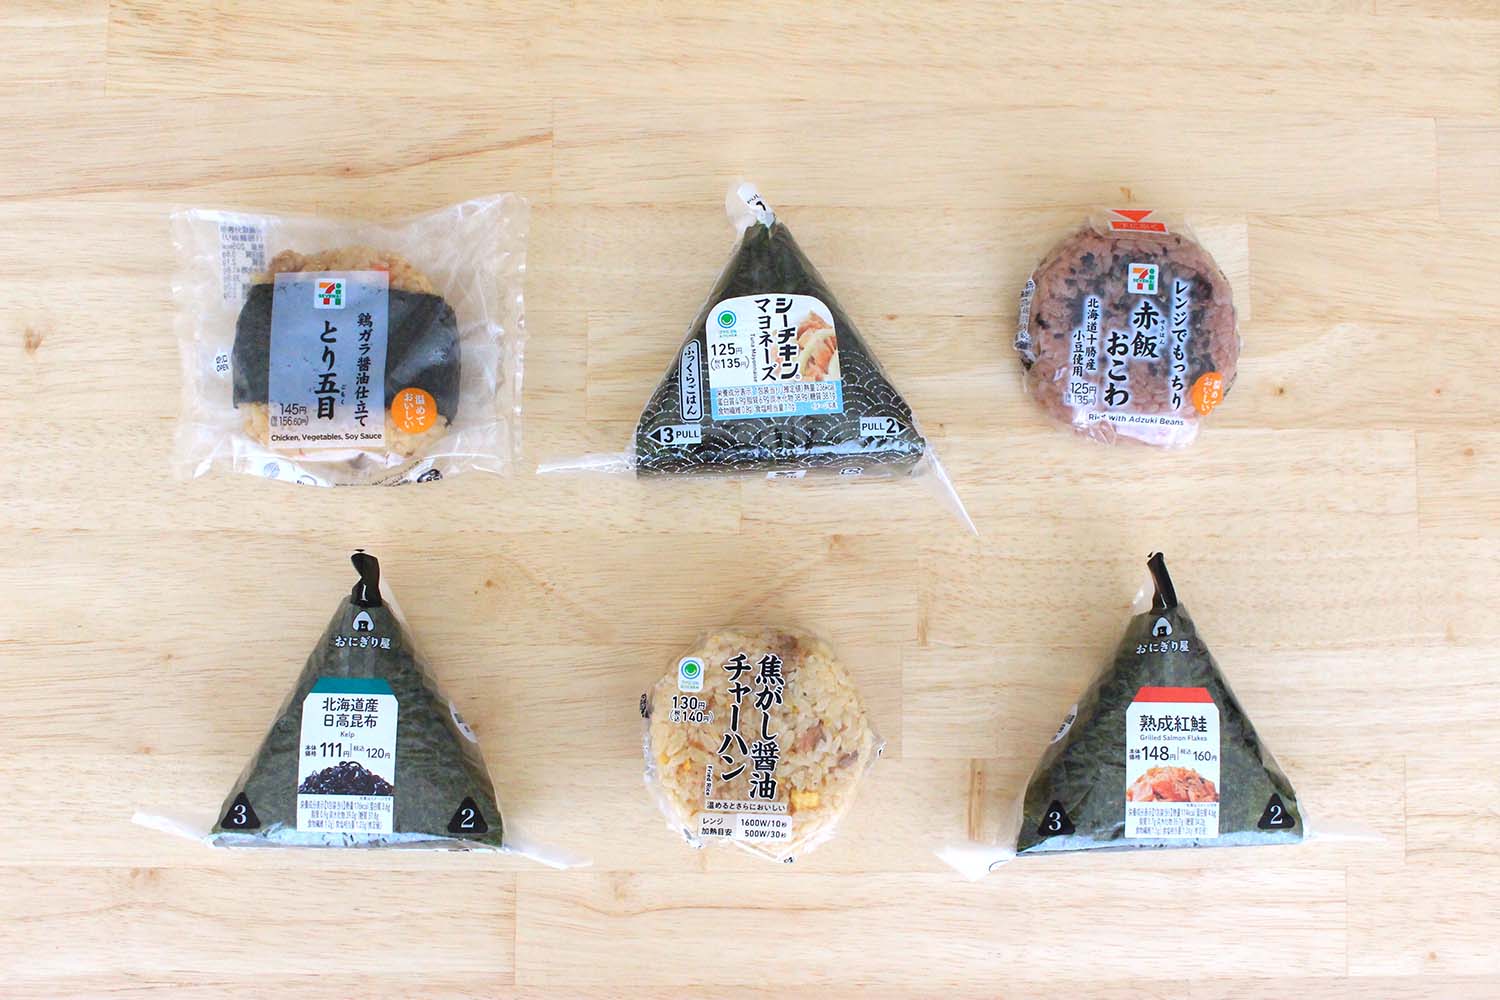 How to eat convenience store onigiri (rice balls) | Easily open each type perfectly, every time!